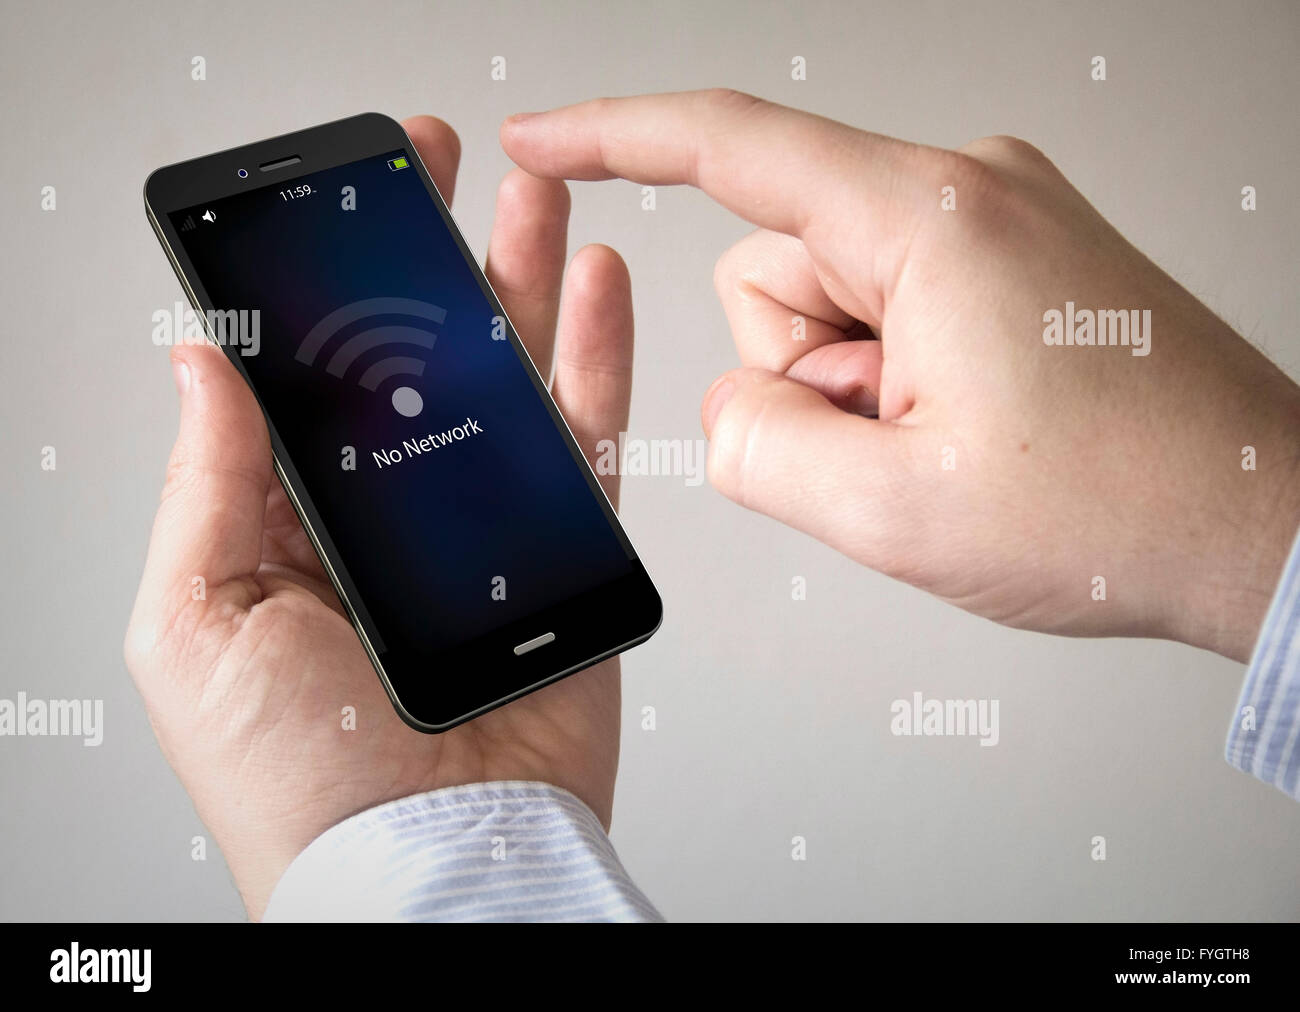 hand touching screen on modern mobile smart phone with no network on the screen Stock Photo